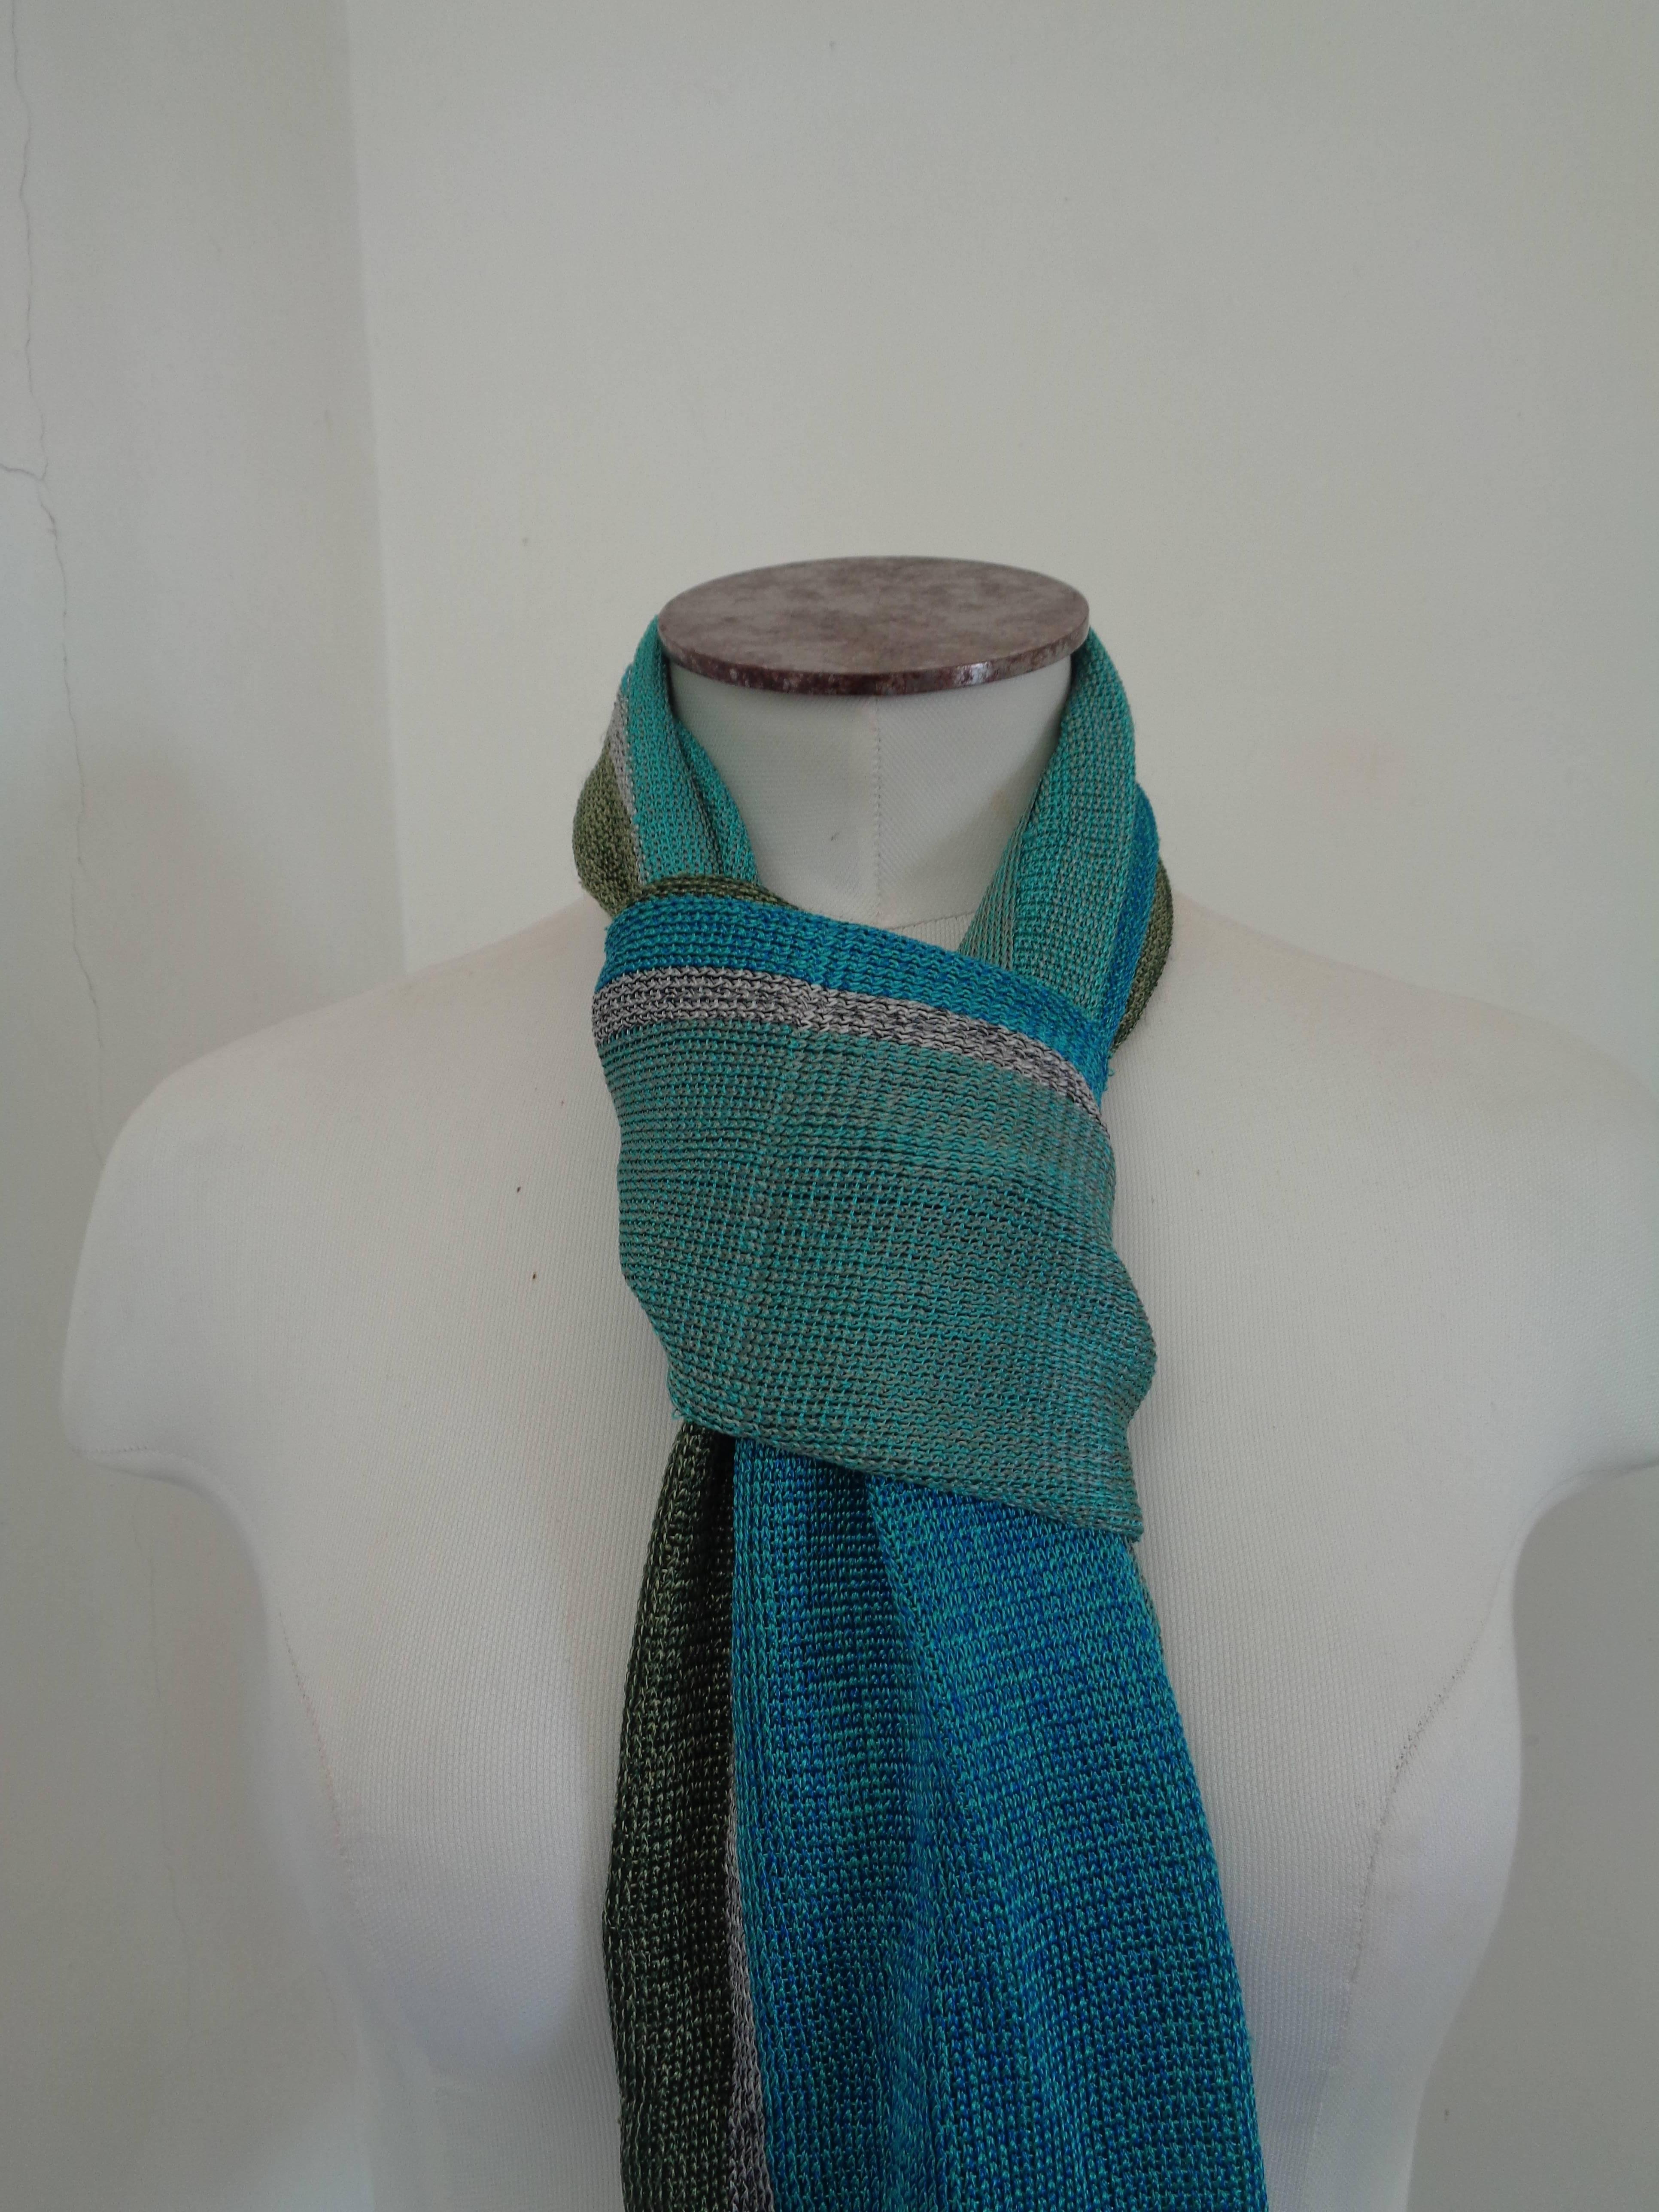 Missoni multicoloured Scarf

Totally made in italy

Composition: Viscose